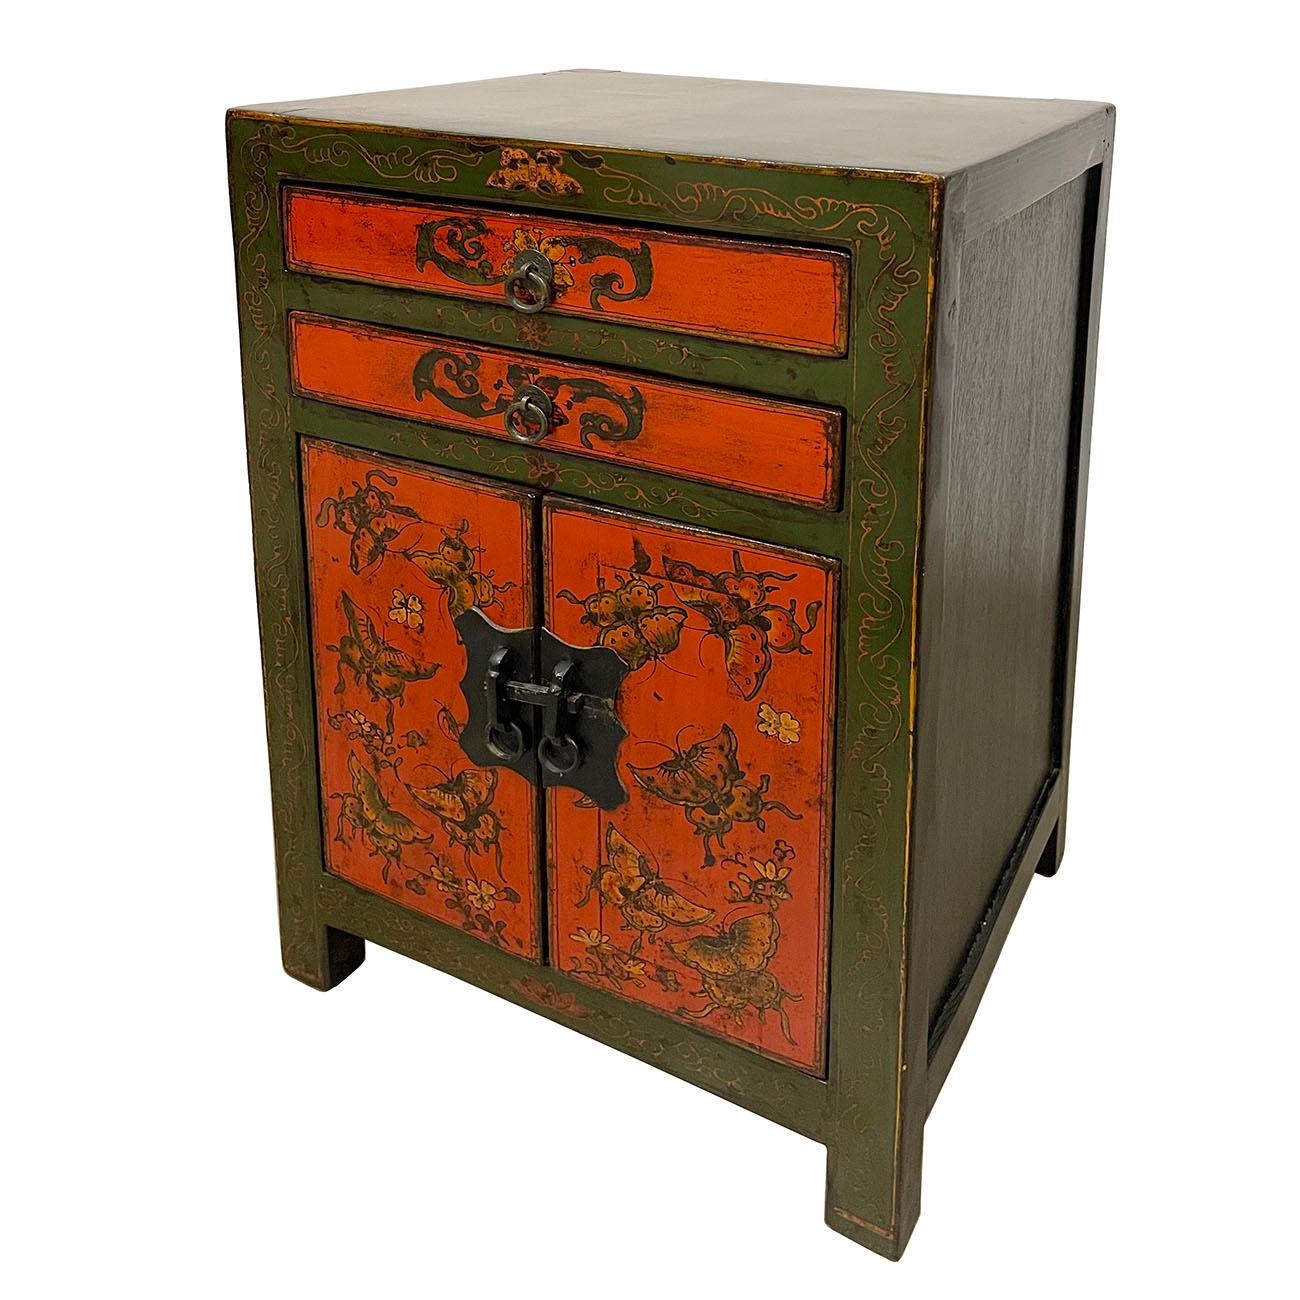 This beautiful night stand is hand made and have beautiful Chinese traditional folks art painting of bats on the front. Very sturdy. It has two open doors compartment and two drawers on the front with antique hardware on it. There are a lot of